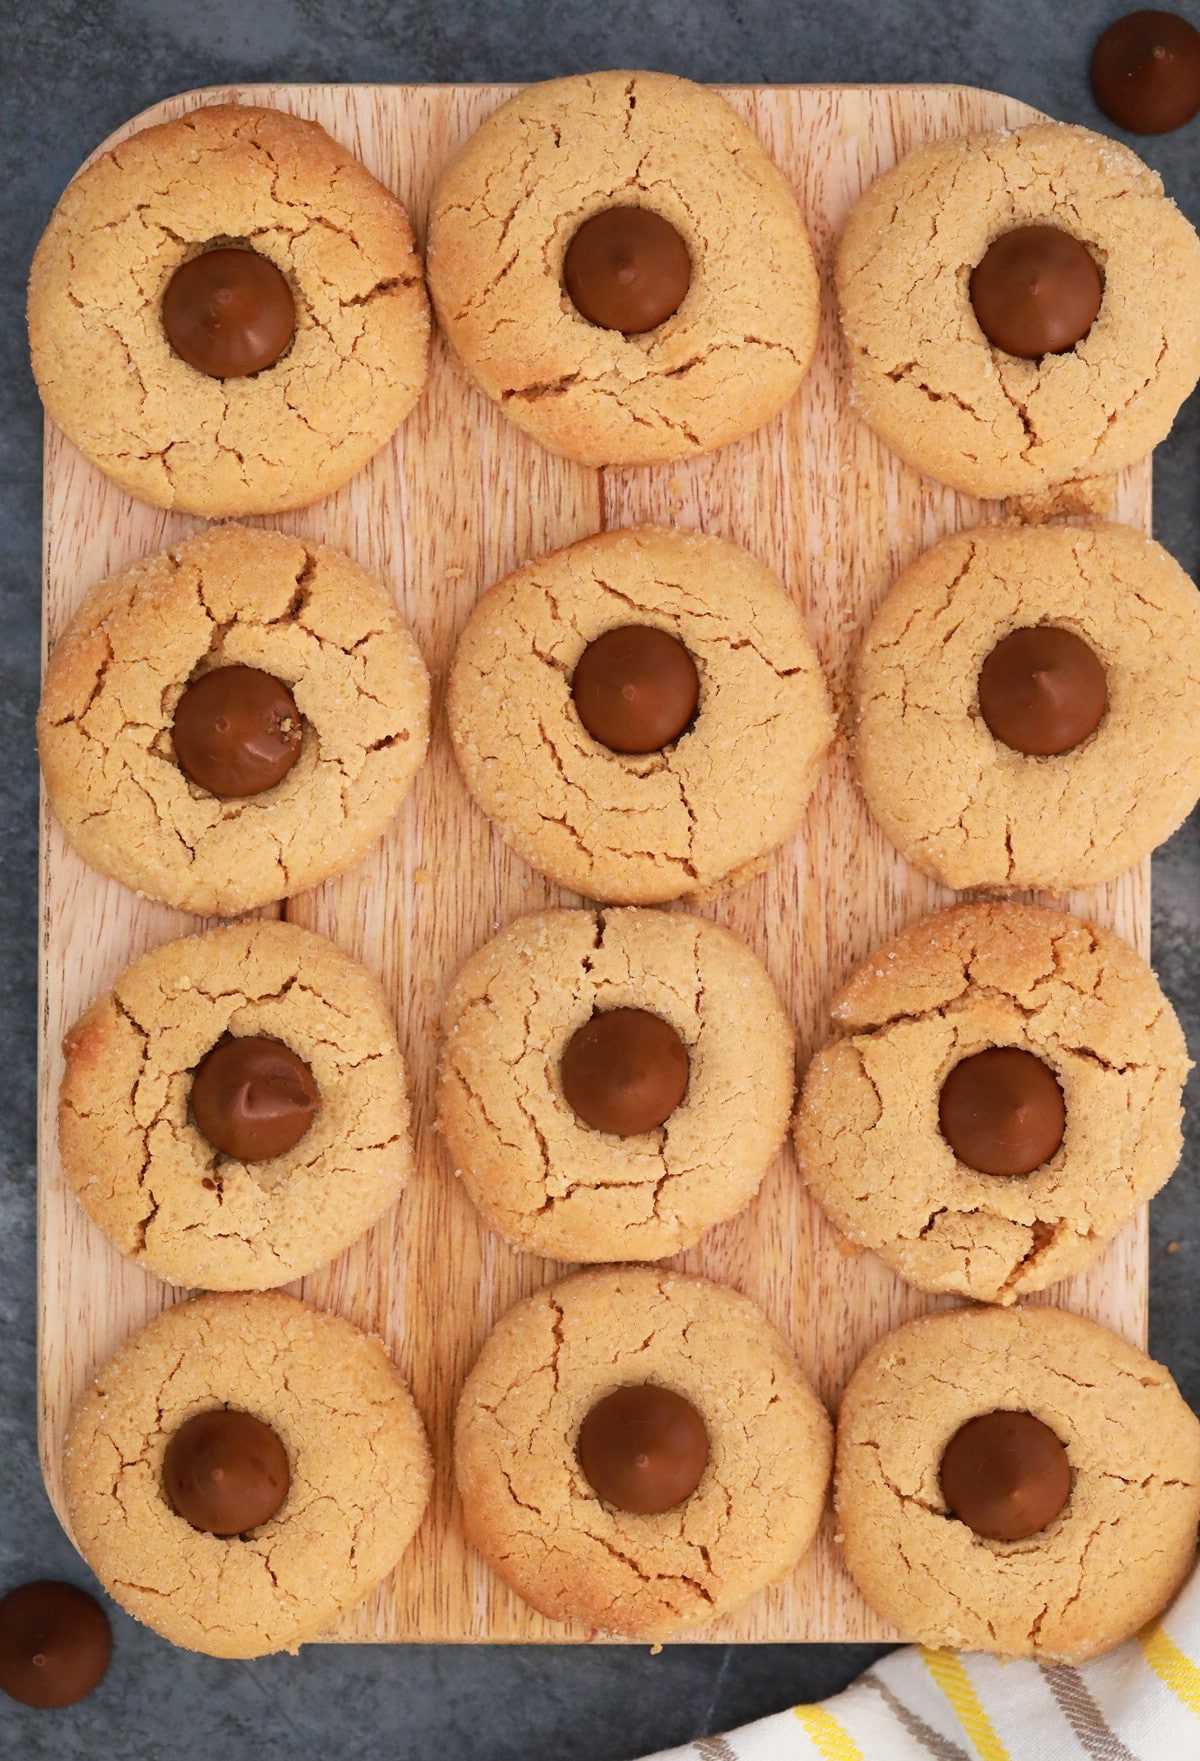 Baked peanut butter blossom cookies on cookie sheet